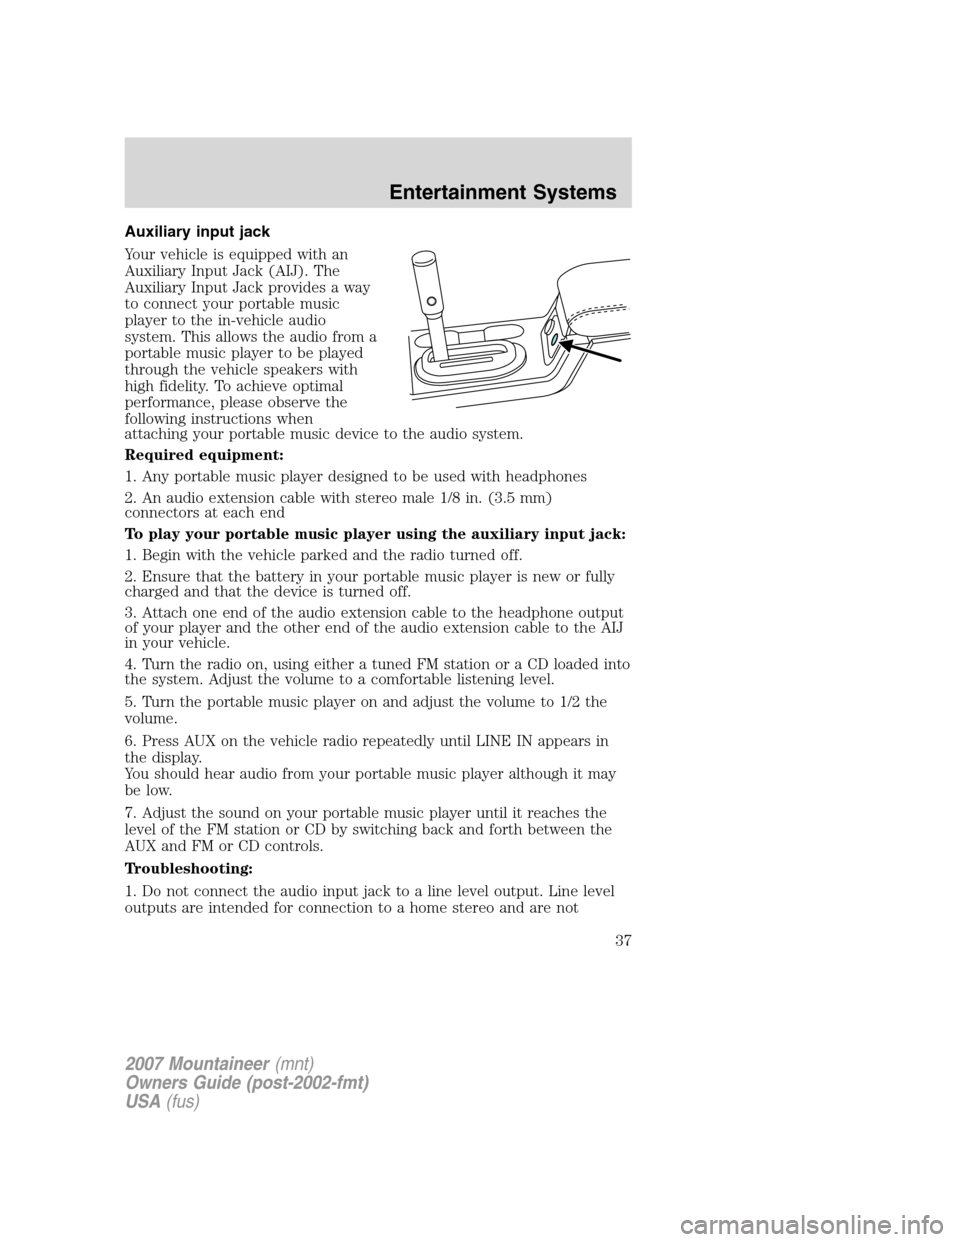 Mercury Mountaineer 2007  s Owners Guide Auxiliary input jack
Your vehicle is equipped with an
Auxiliary Input Jack (AIJ). The
Auxiliary Input Jack provides a way
to connect your portable music
player to the in-vehicle audio
system. This all